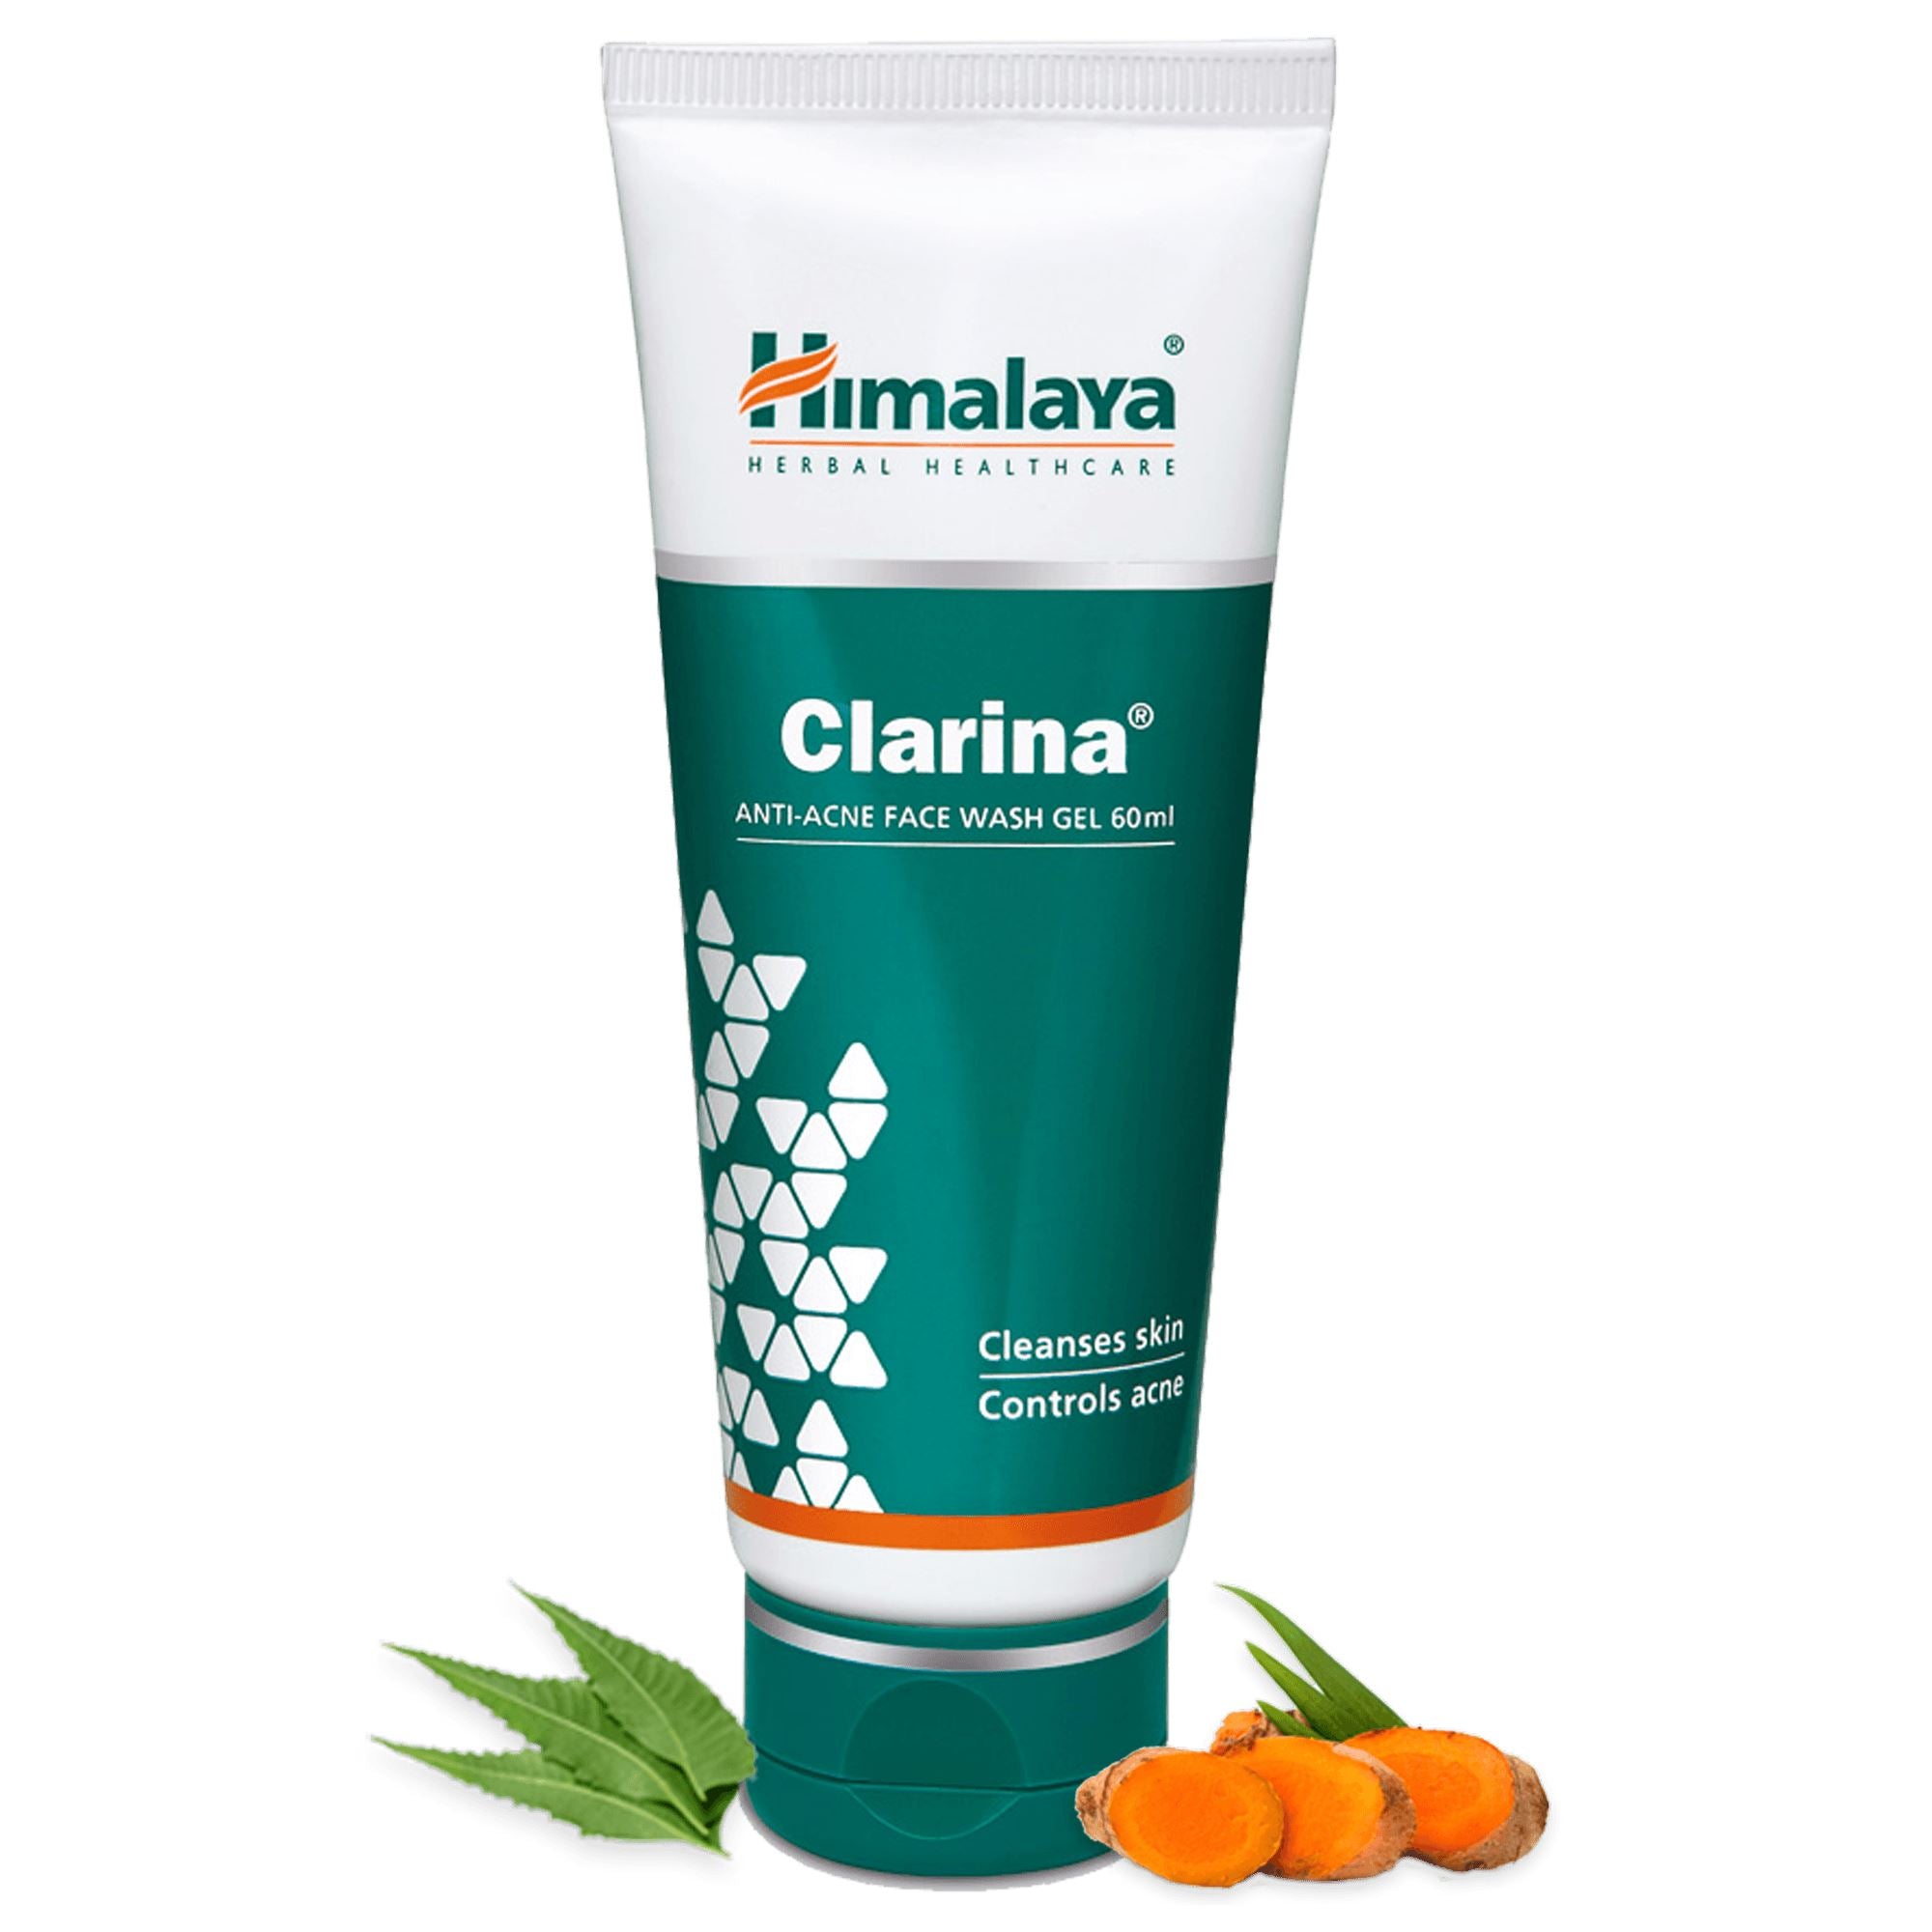 Himalaya Clarina Anti-Acne Face Wash Gel - Cleanses skin and controls acne